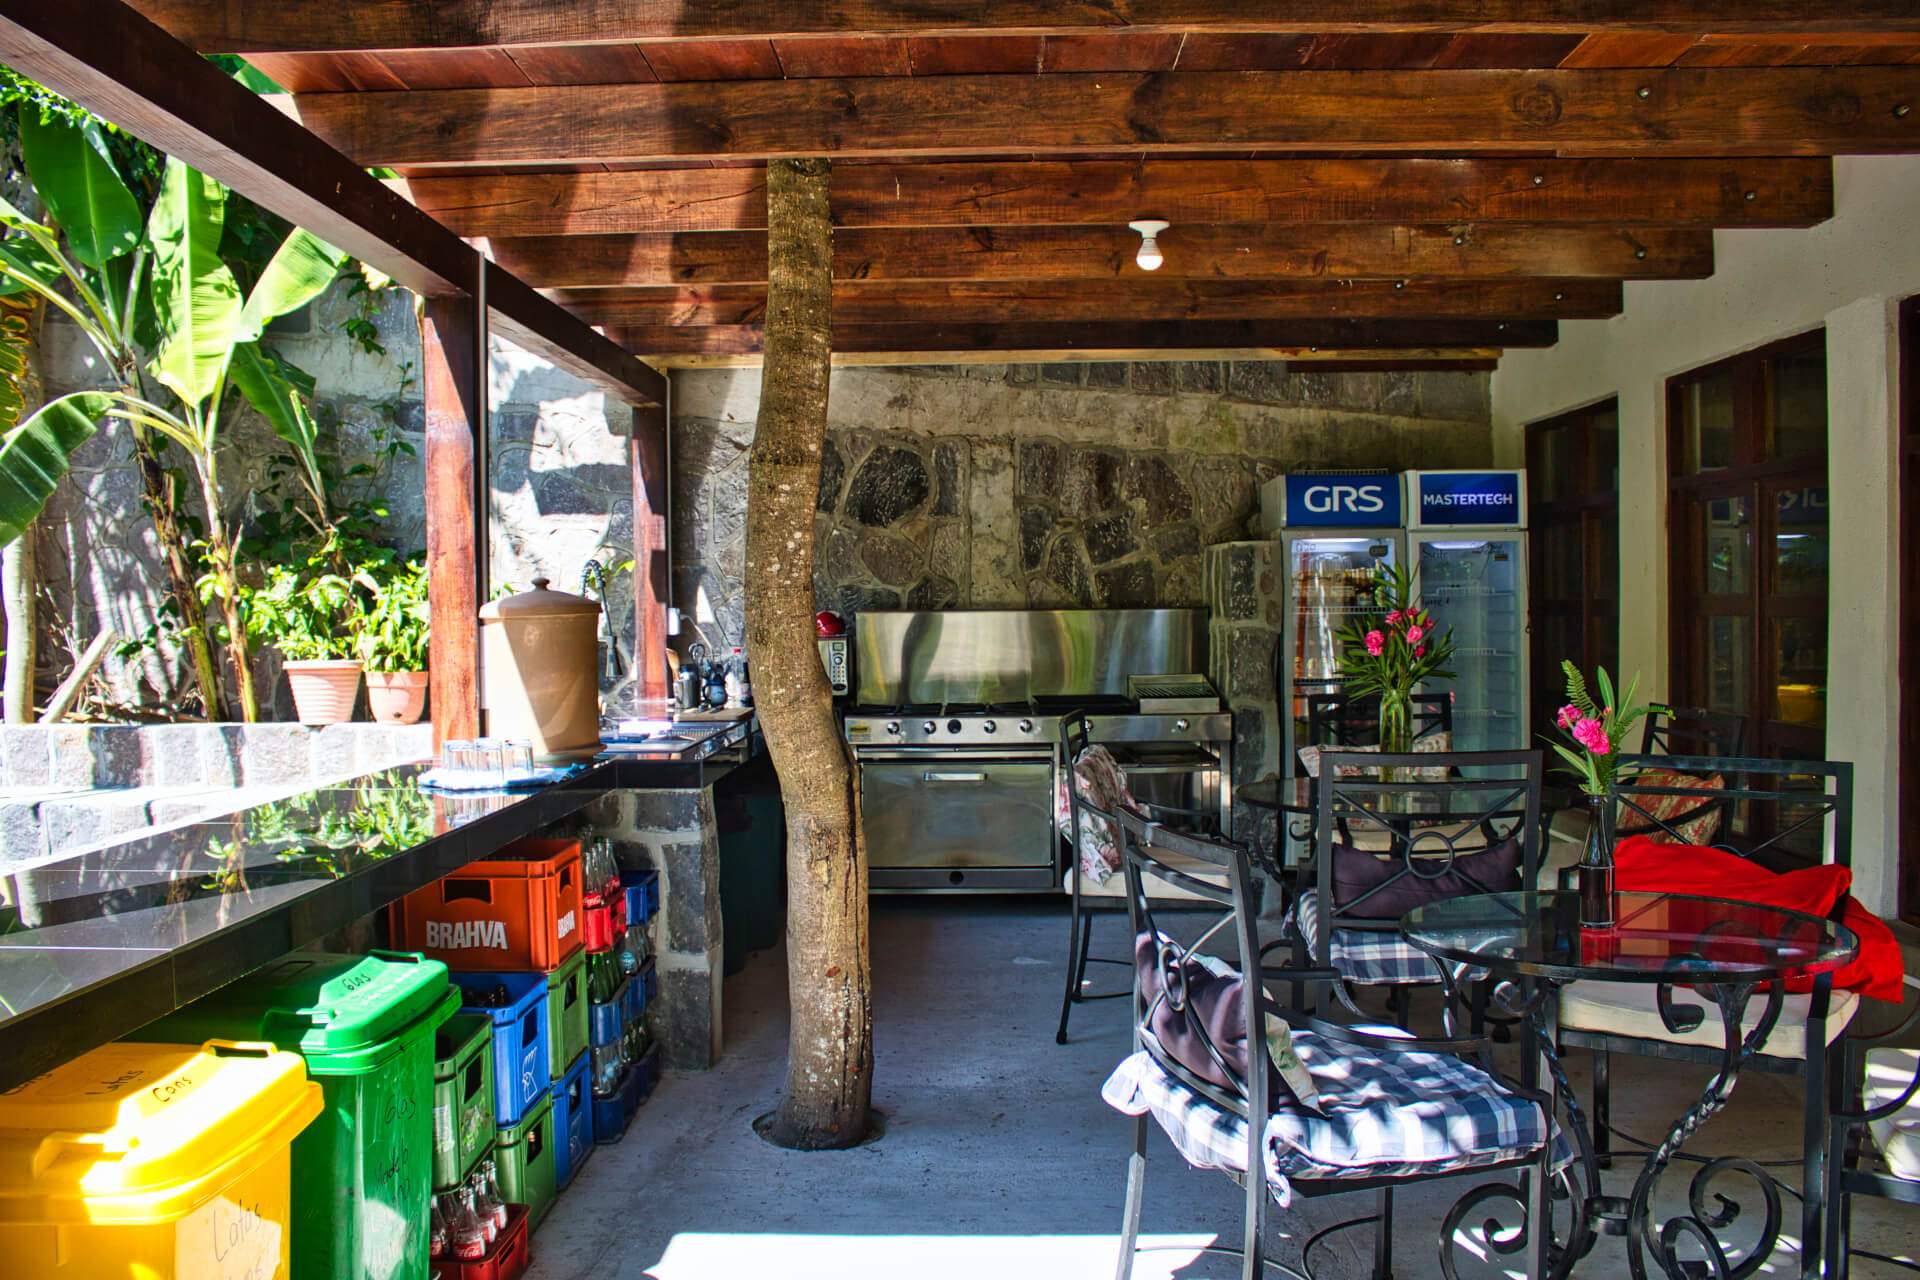 <span  class="uc_style_uc_tiles_grid_image_elementor_uc_items_attribute_title" style="color:#ffffff;">Communal outdoor Kitchen</span>